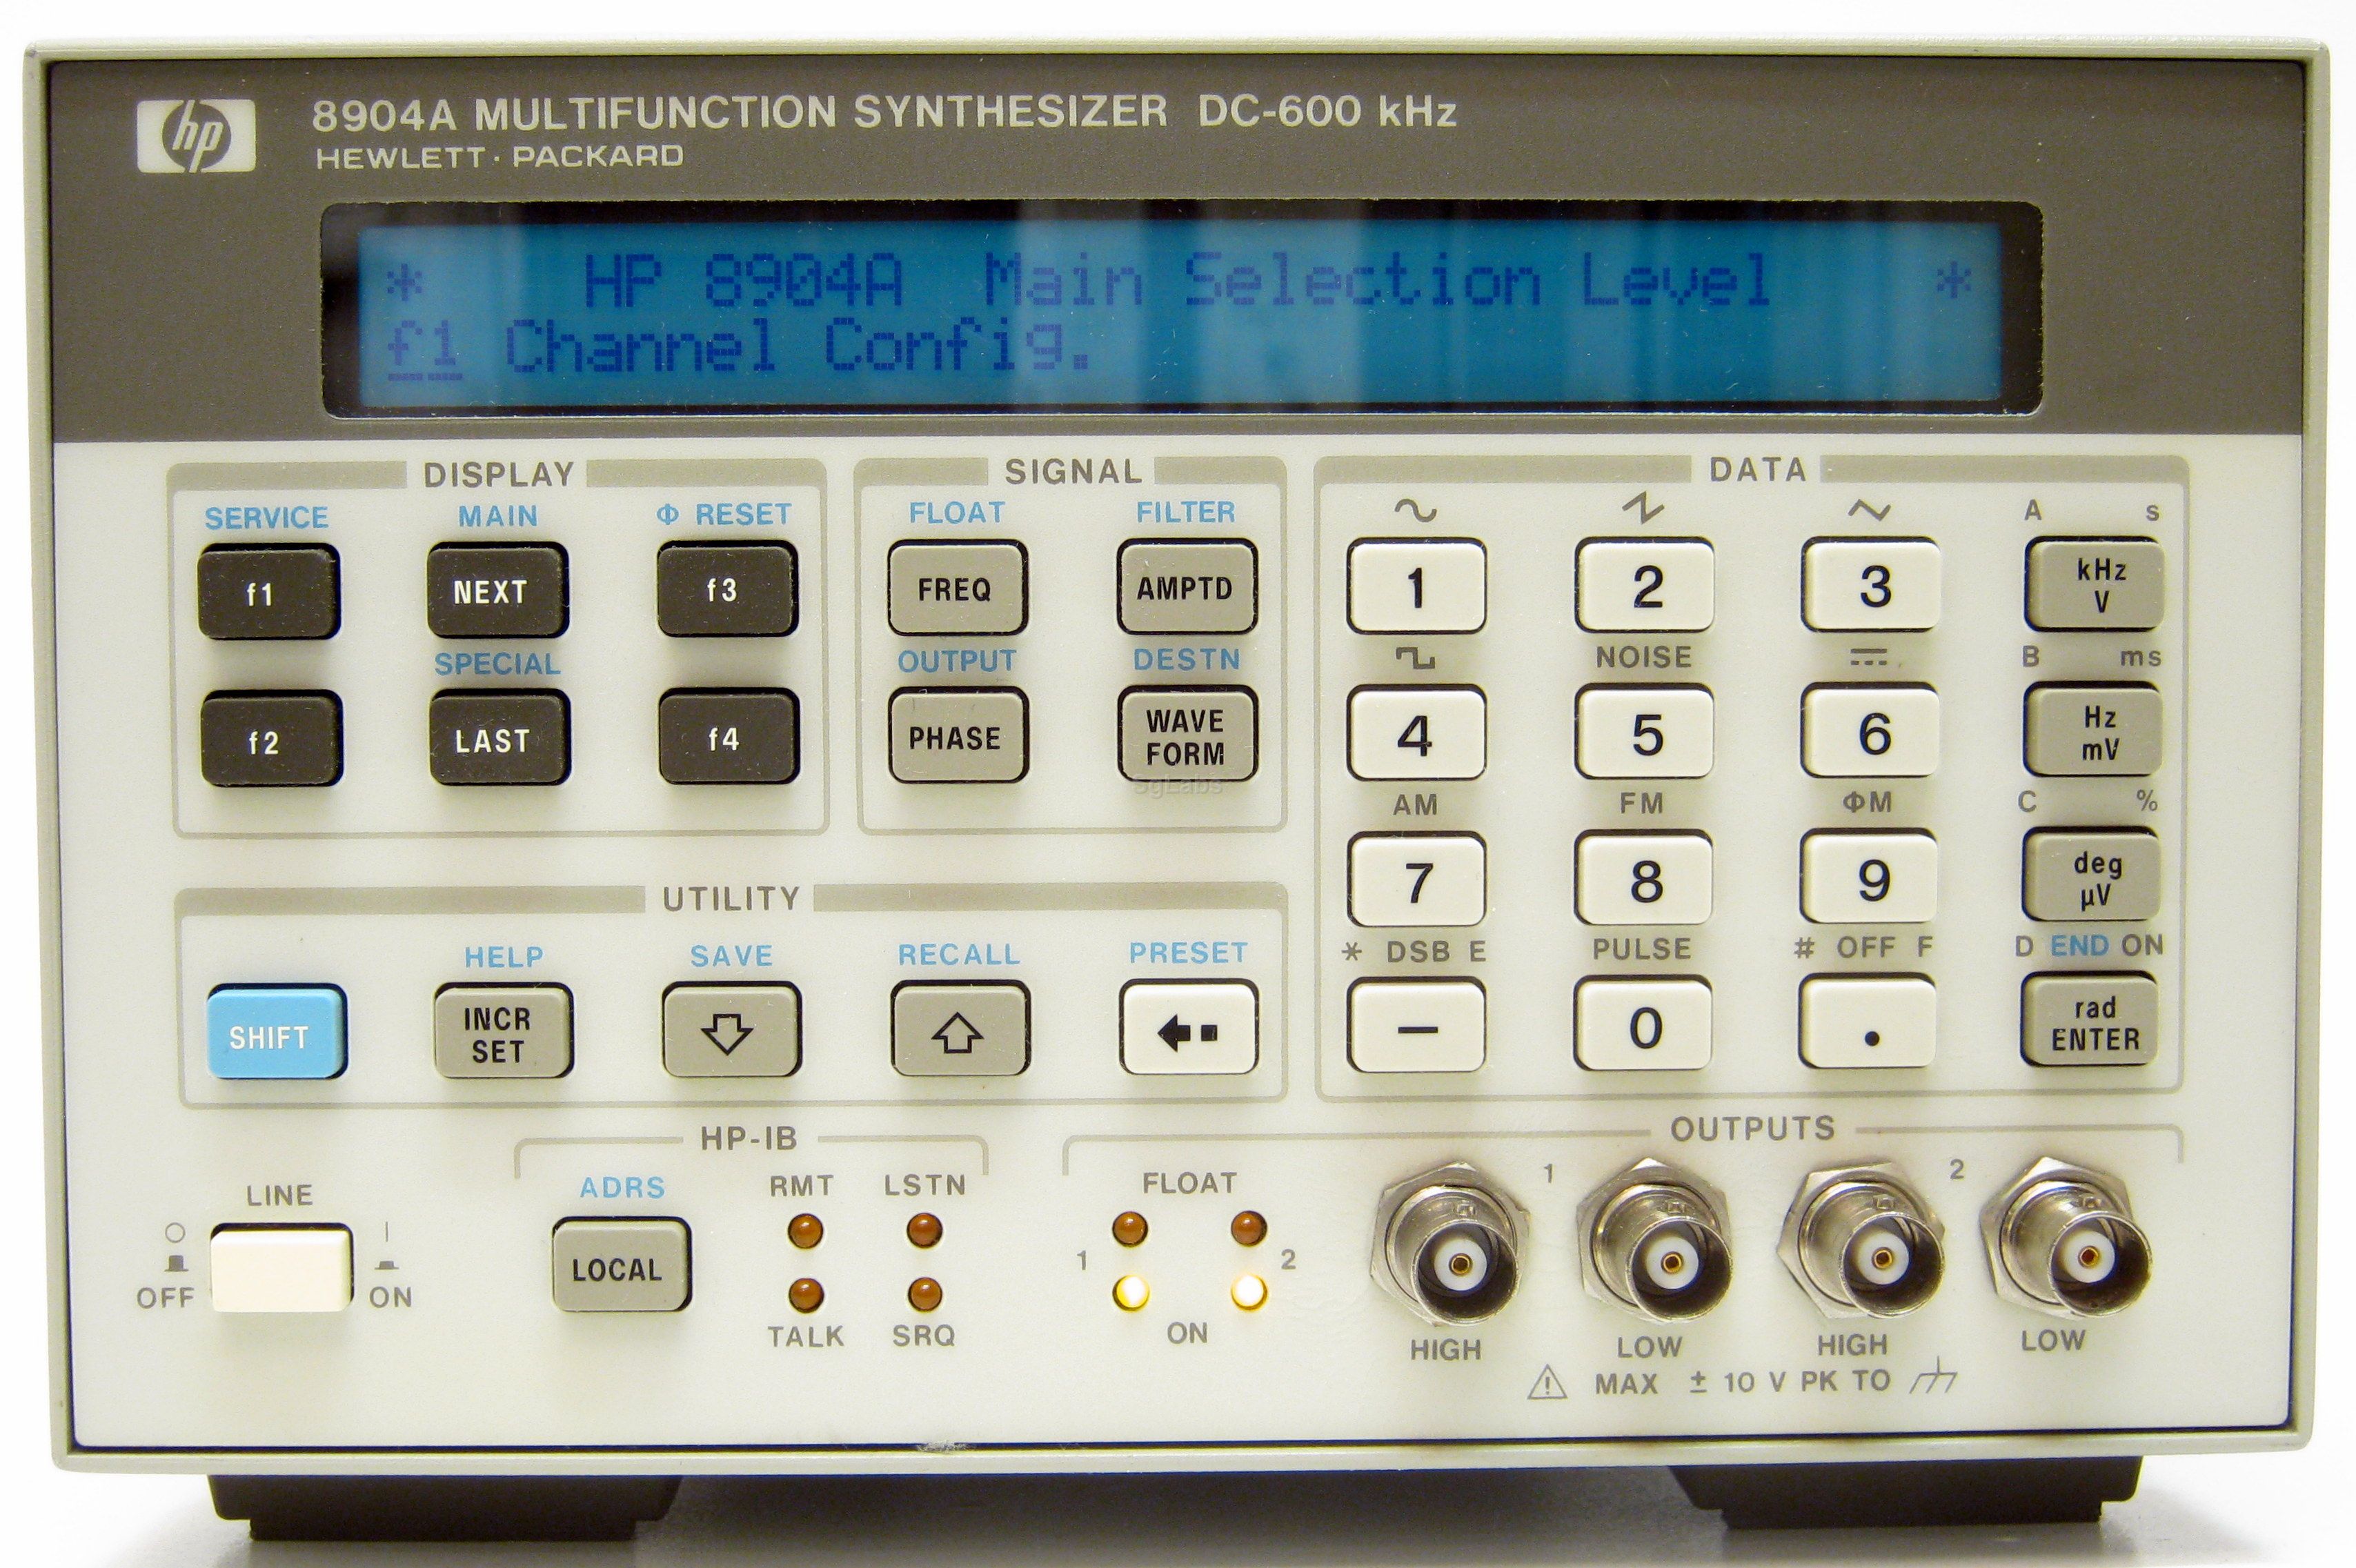 HP 8904A Multifunction Synthesizer DC 600 kHz OPT 001 for sale online 